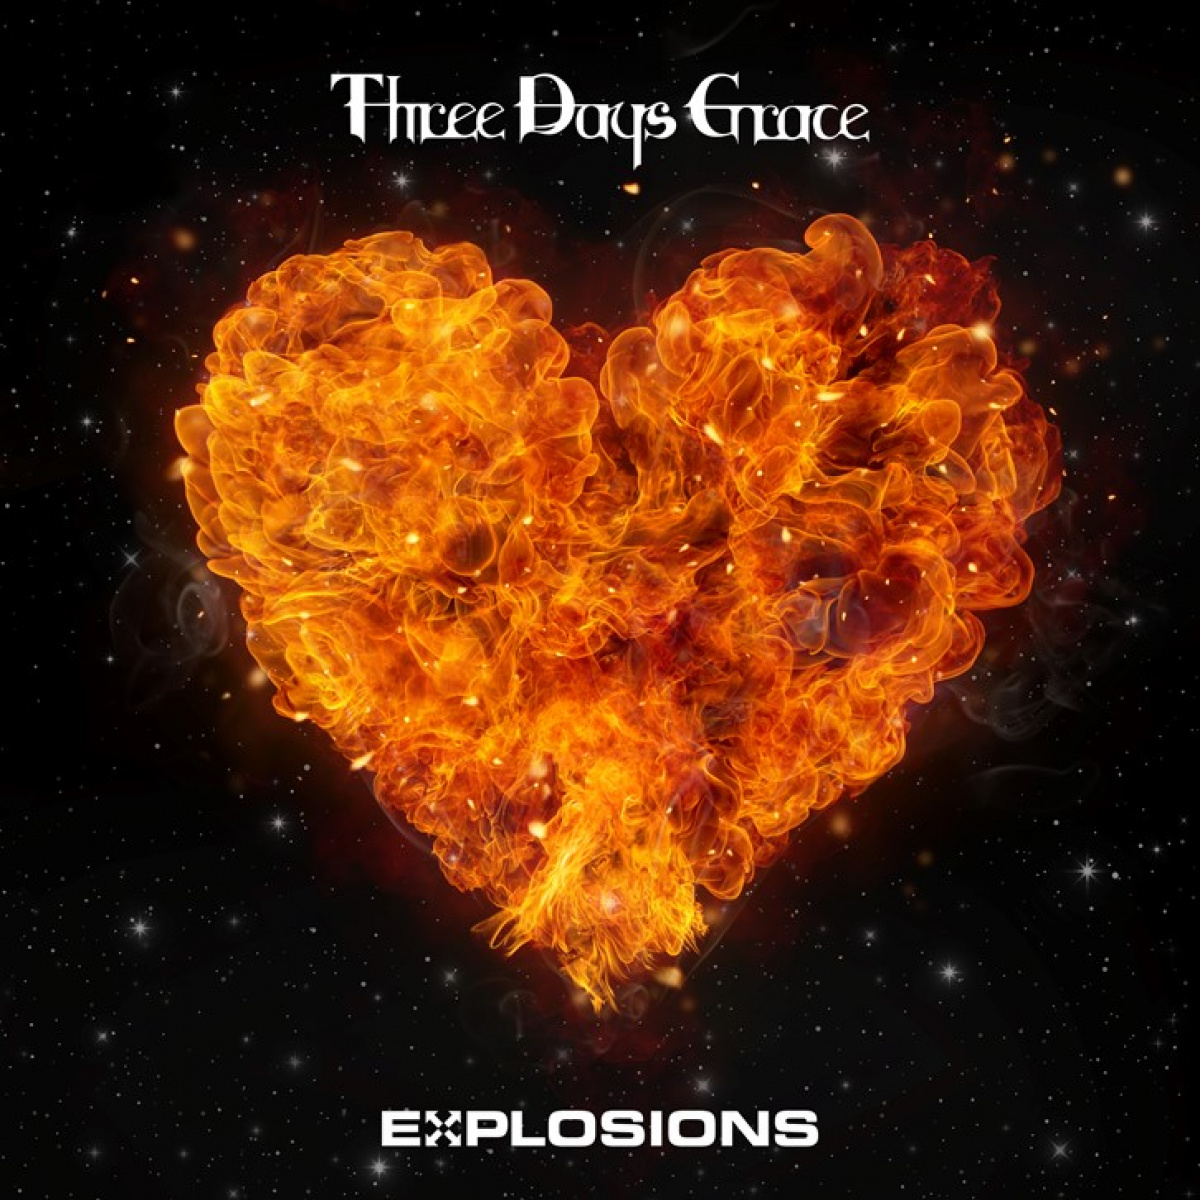 THREE DAYS GRACE EXPLOSIONS CONTEST